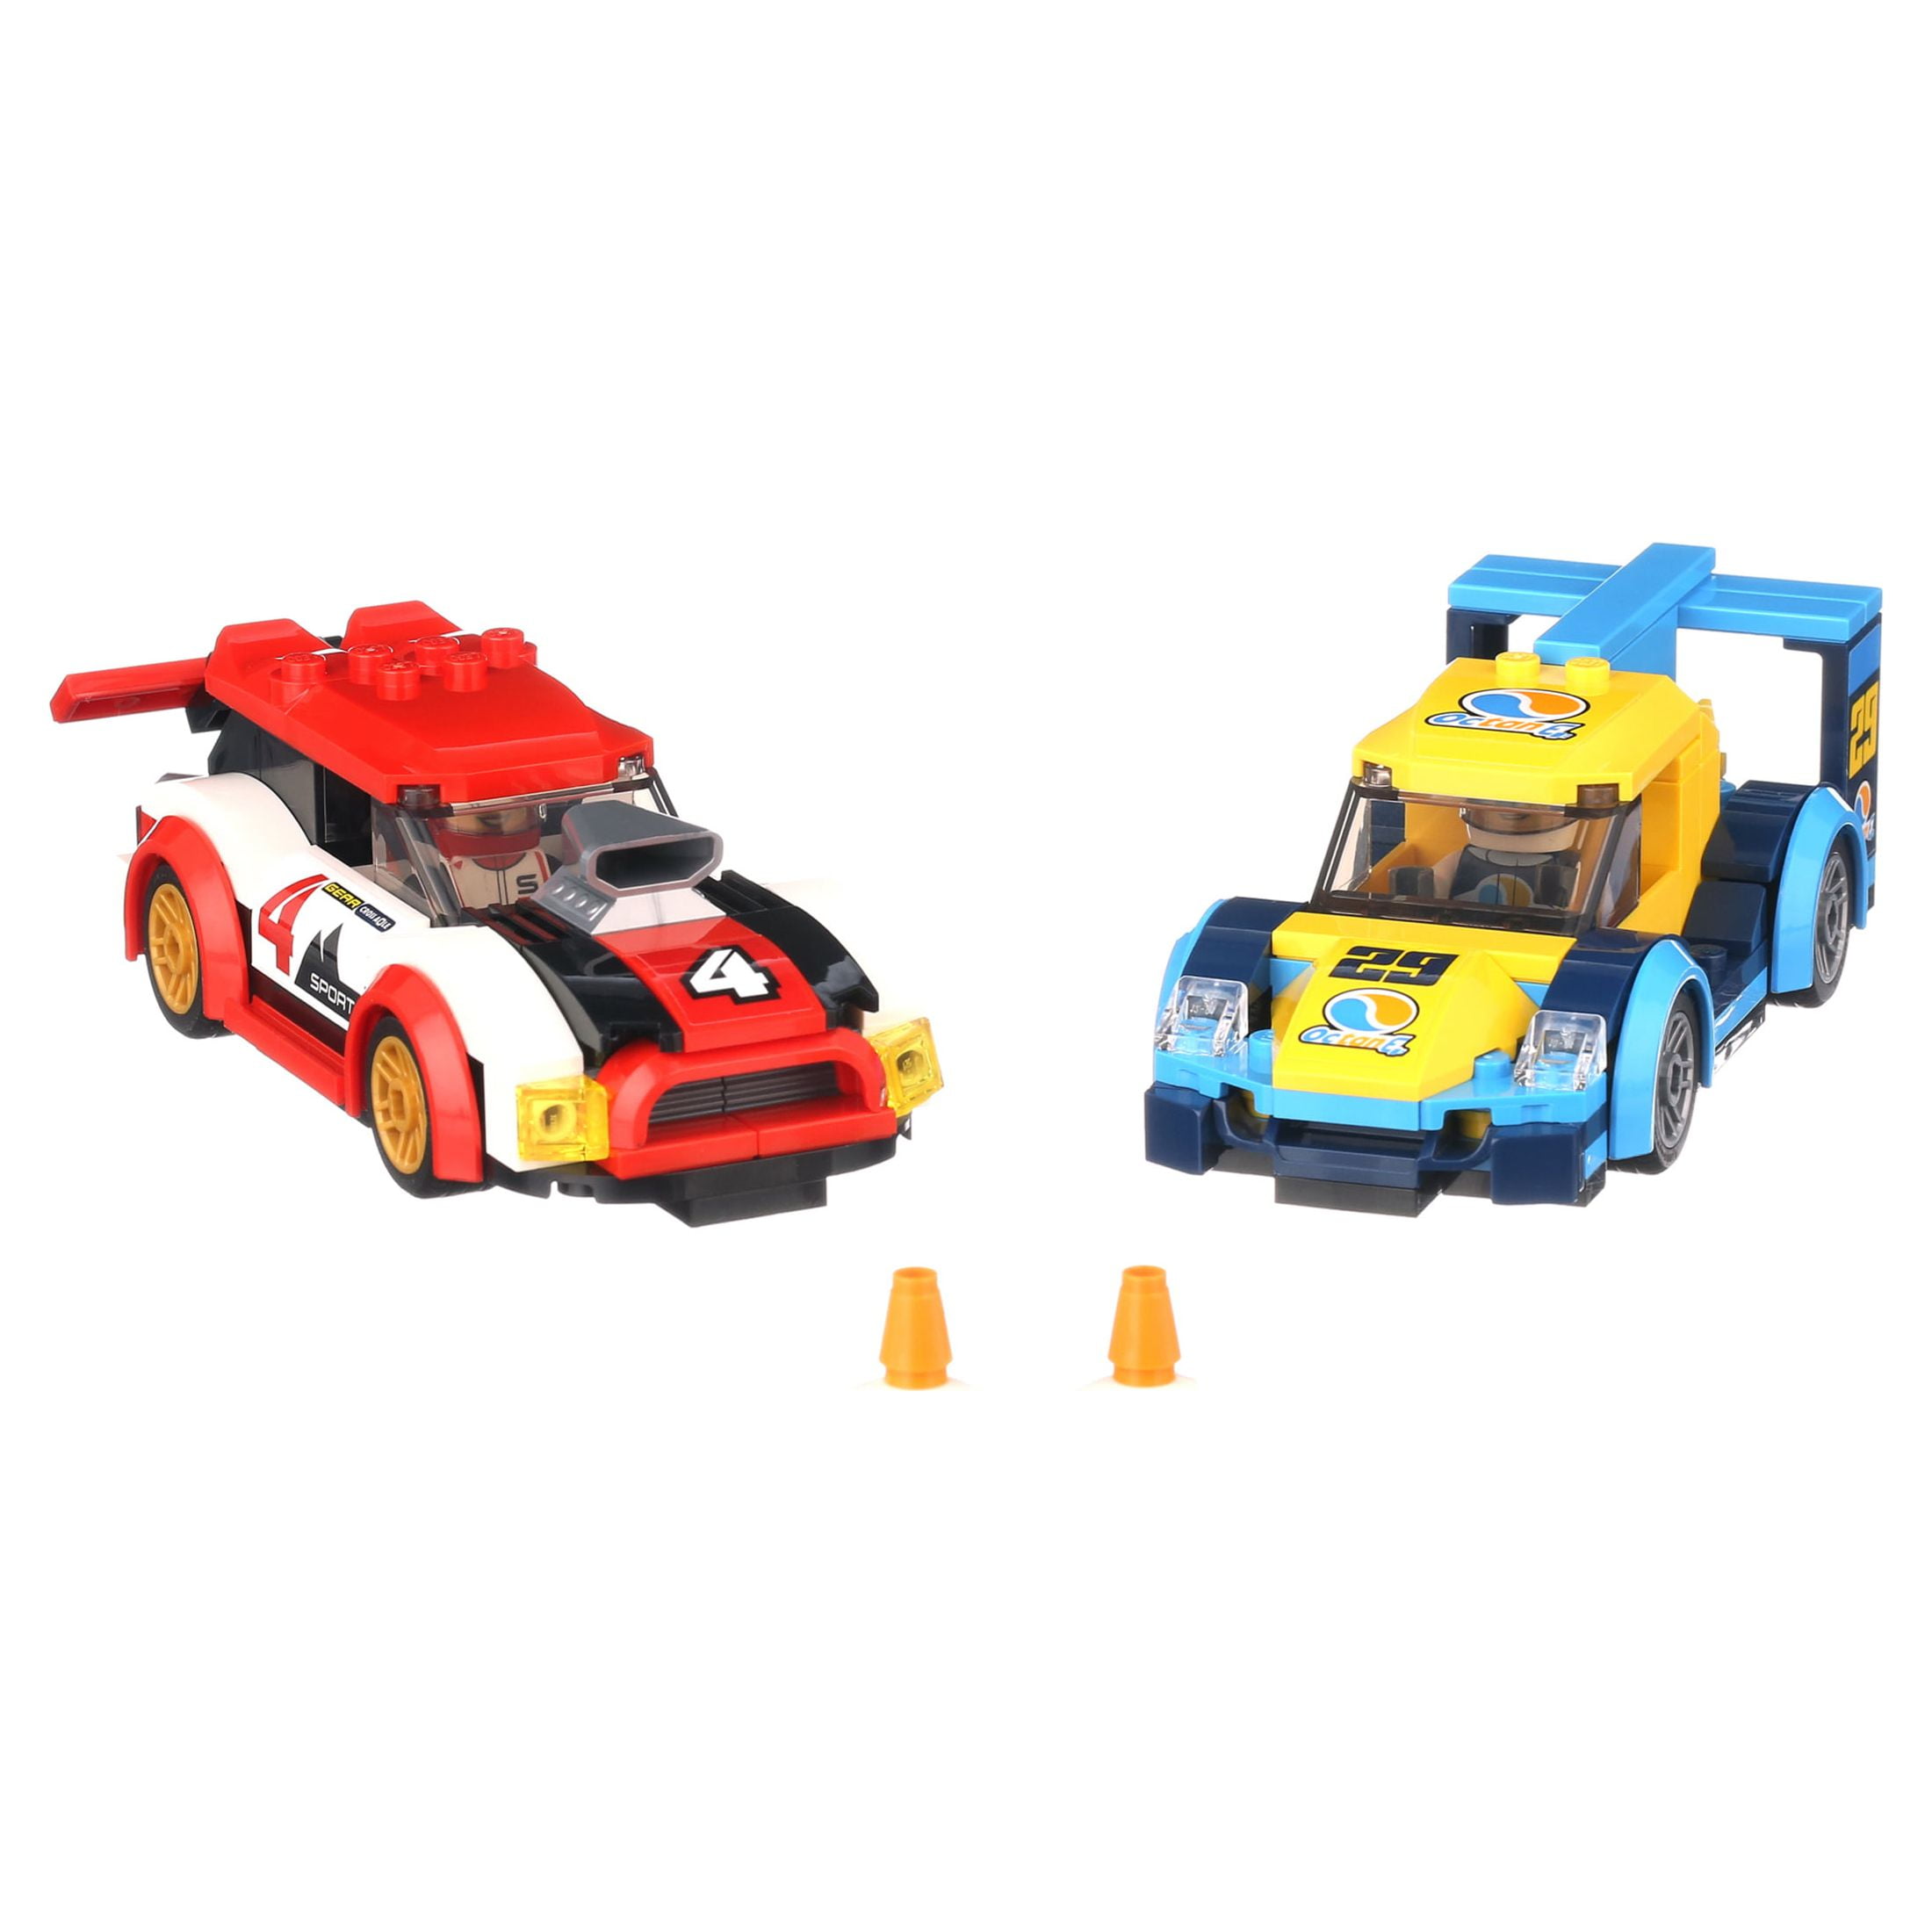 LEGO City Racing Cars 60256 Buildable Toy for Kids (190 Pieces